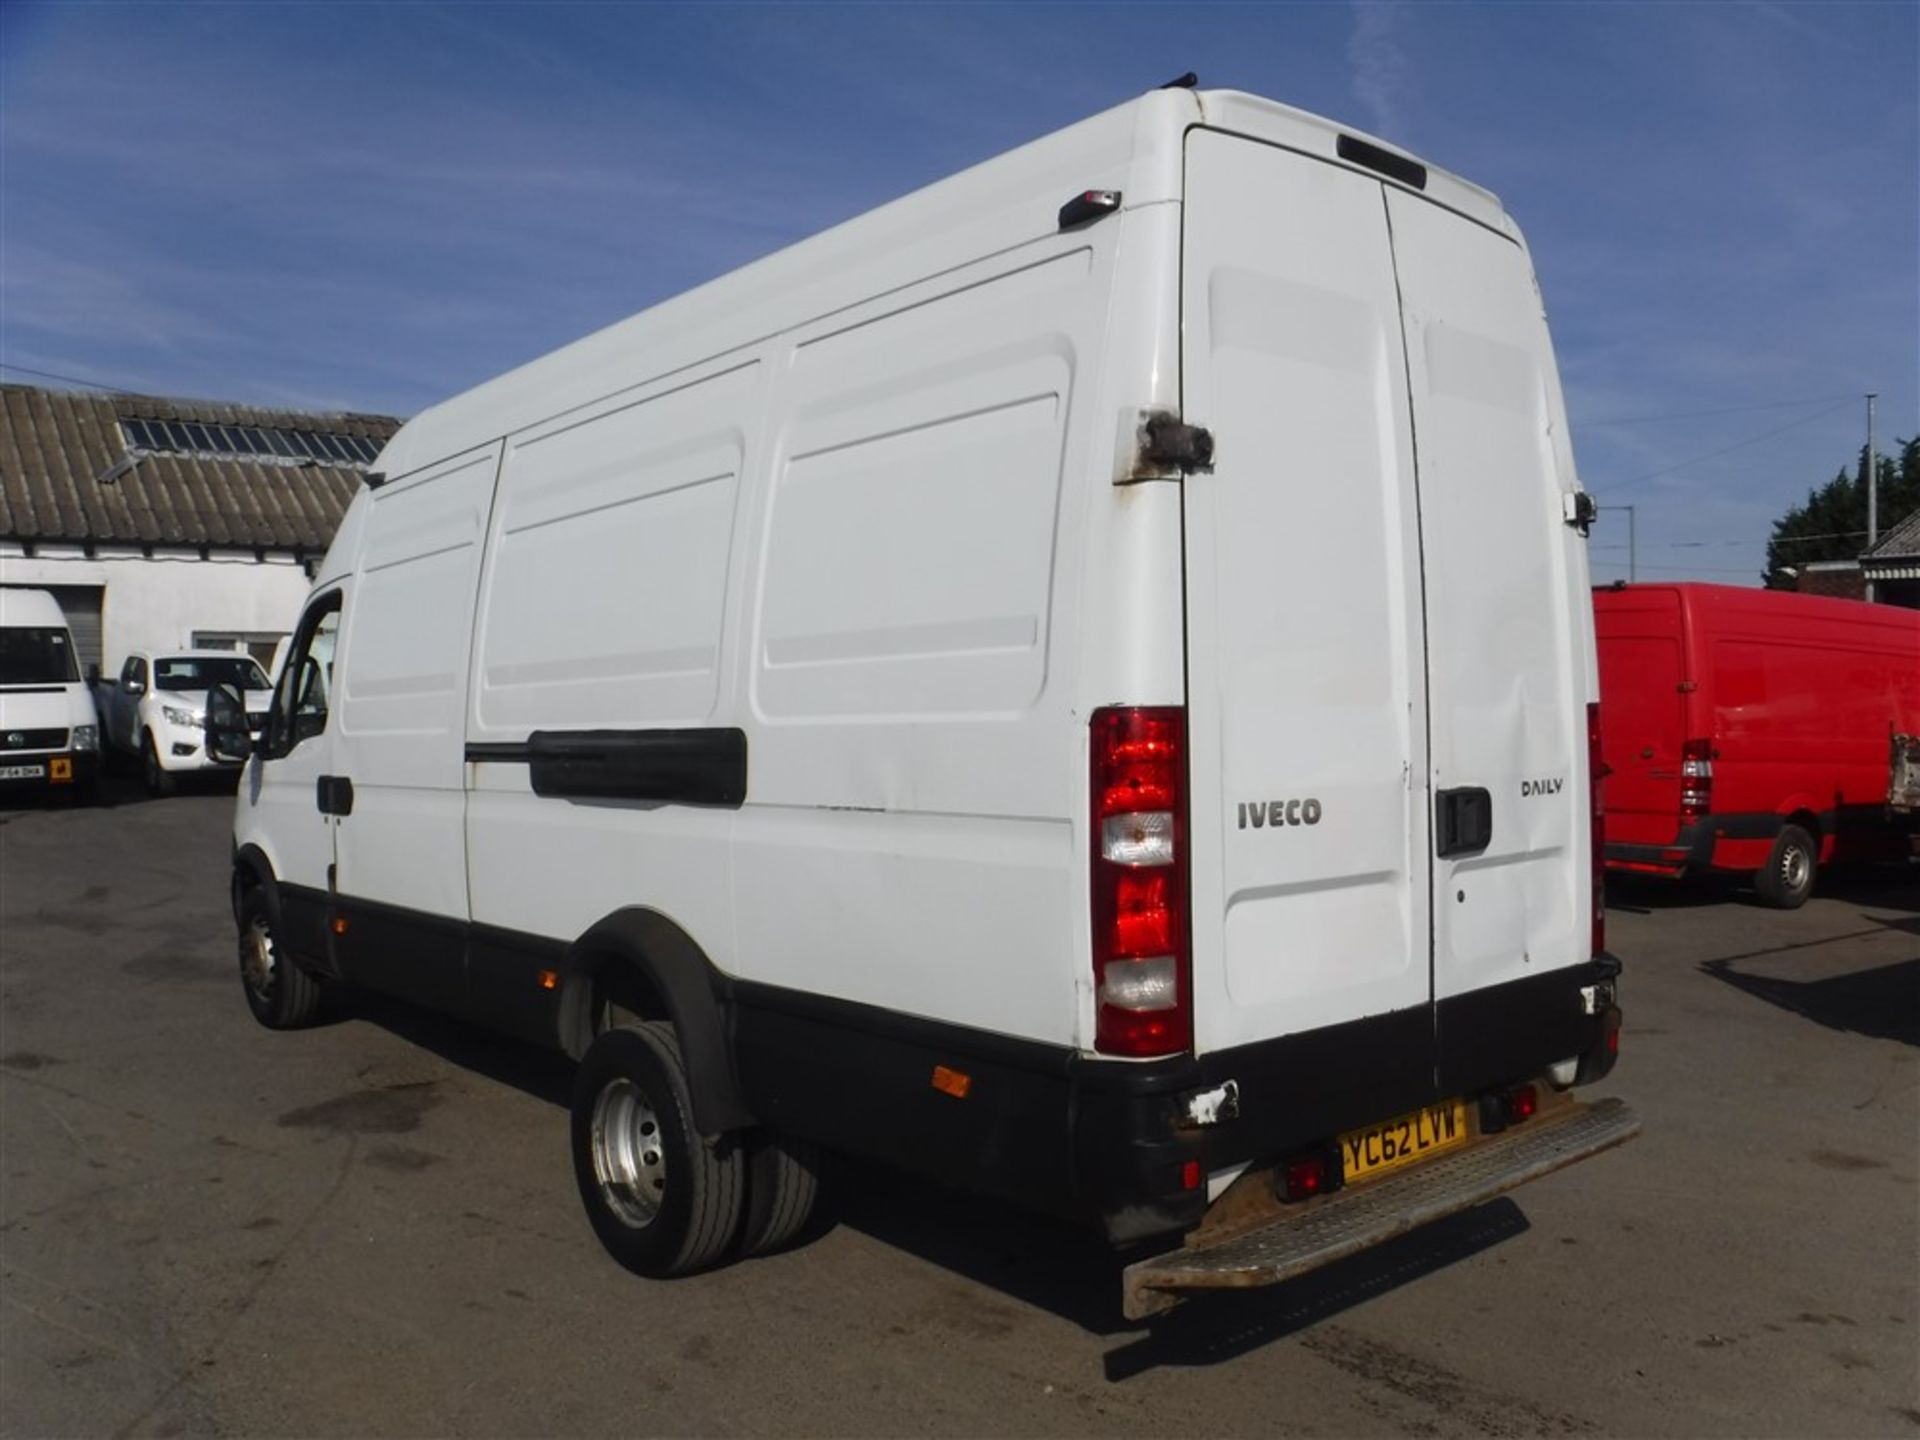 62 reg IVECO DAILY 70C17 7 TON VAN, 1ST REG 10/12, TEST 10/18, 404891KM WARRANTED, V5 HERE, 1 - Image 3 of 5